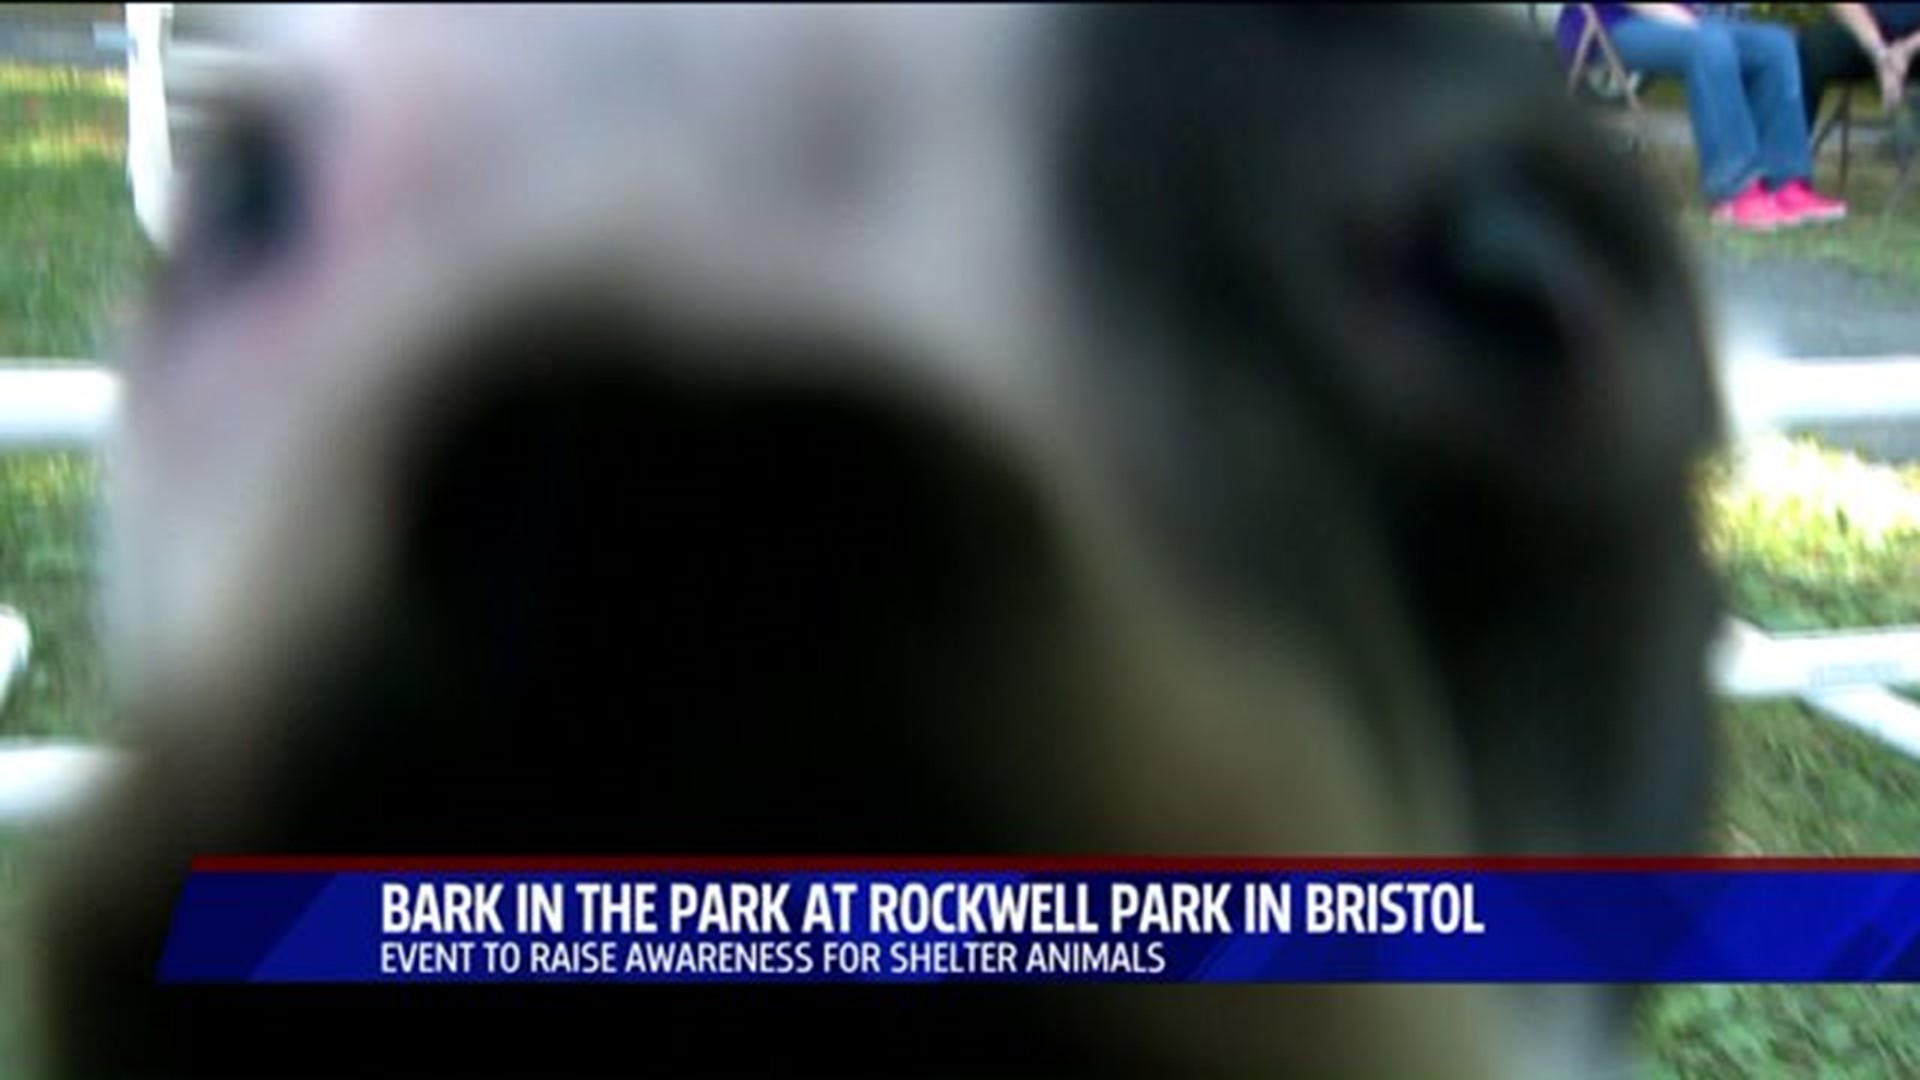 Four-legged friends at the Bark in the Park